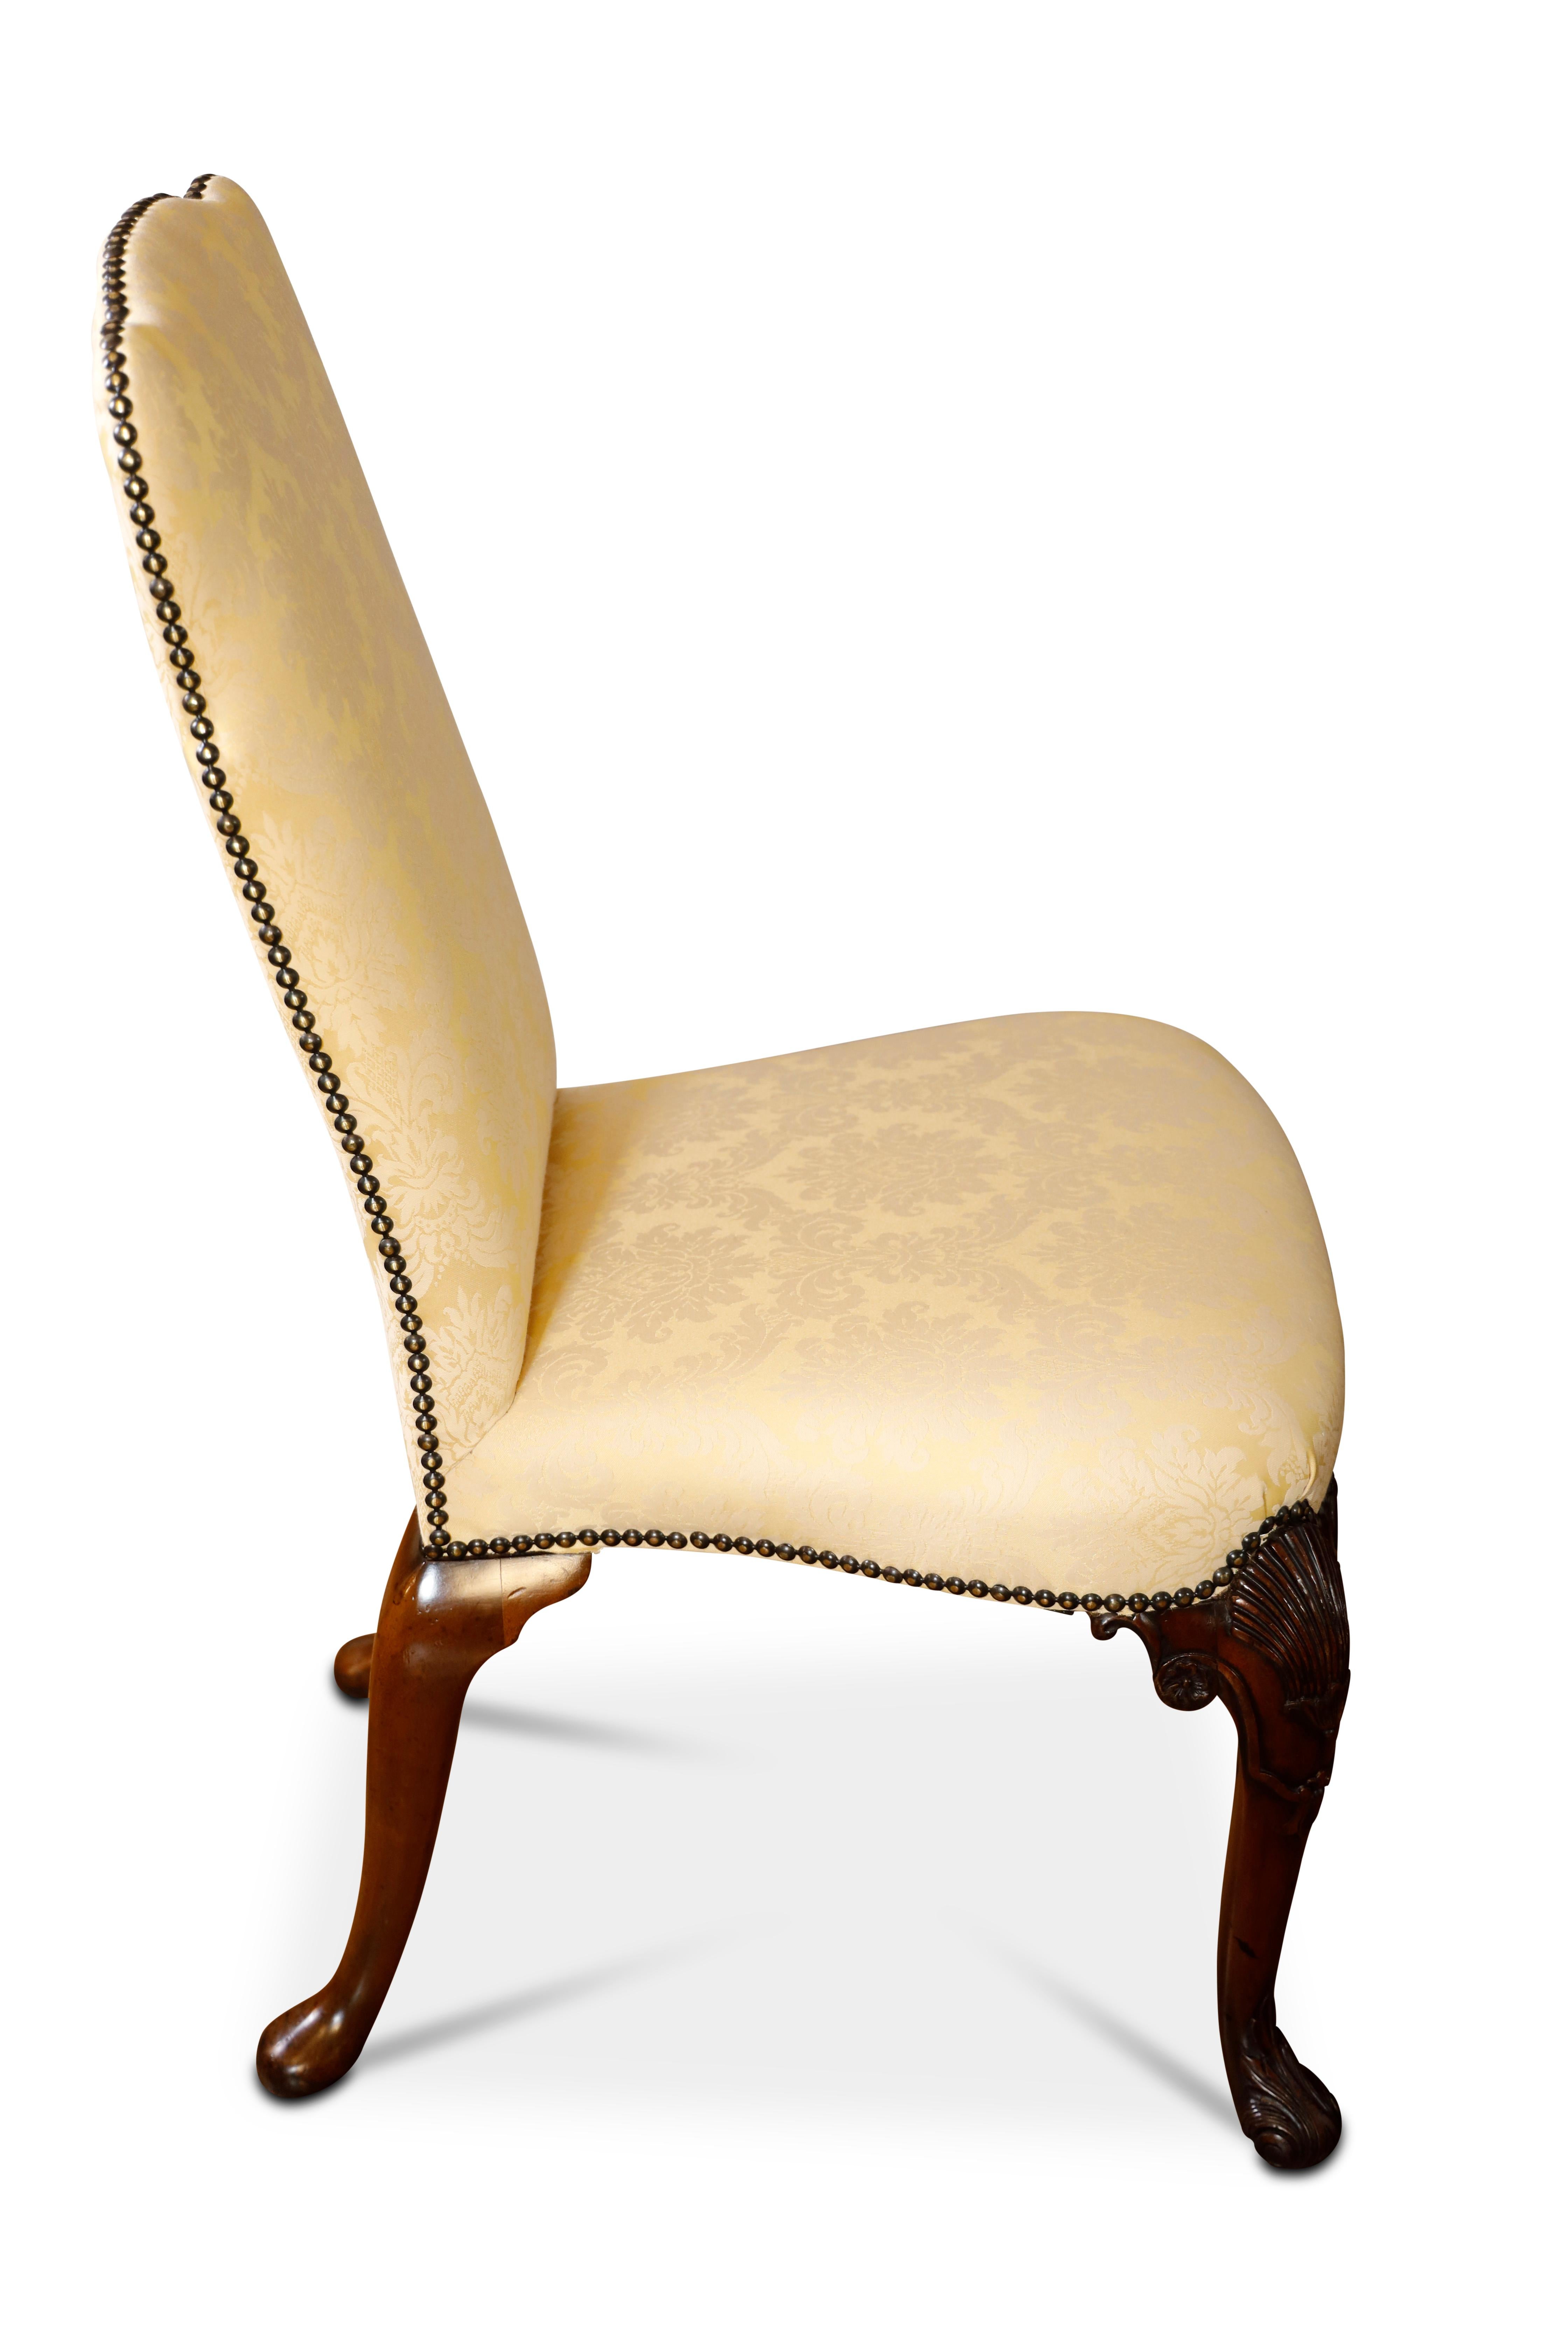 Mahogany Queen Anne Style Dining Chairs For Sale 6